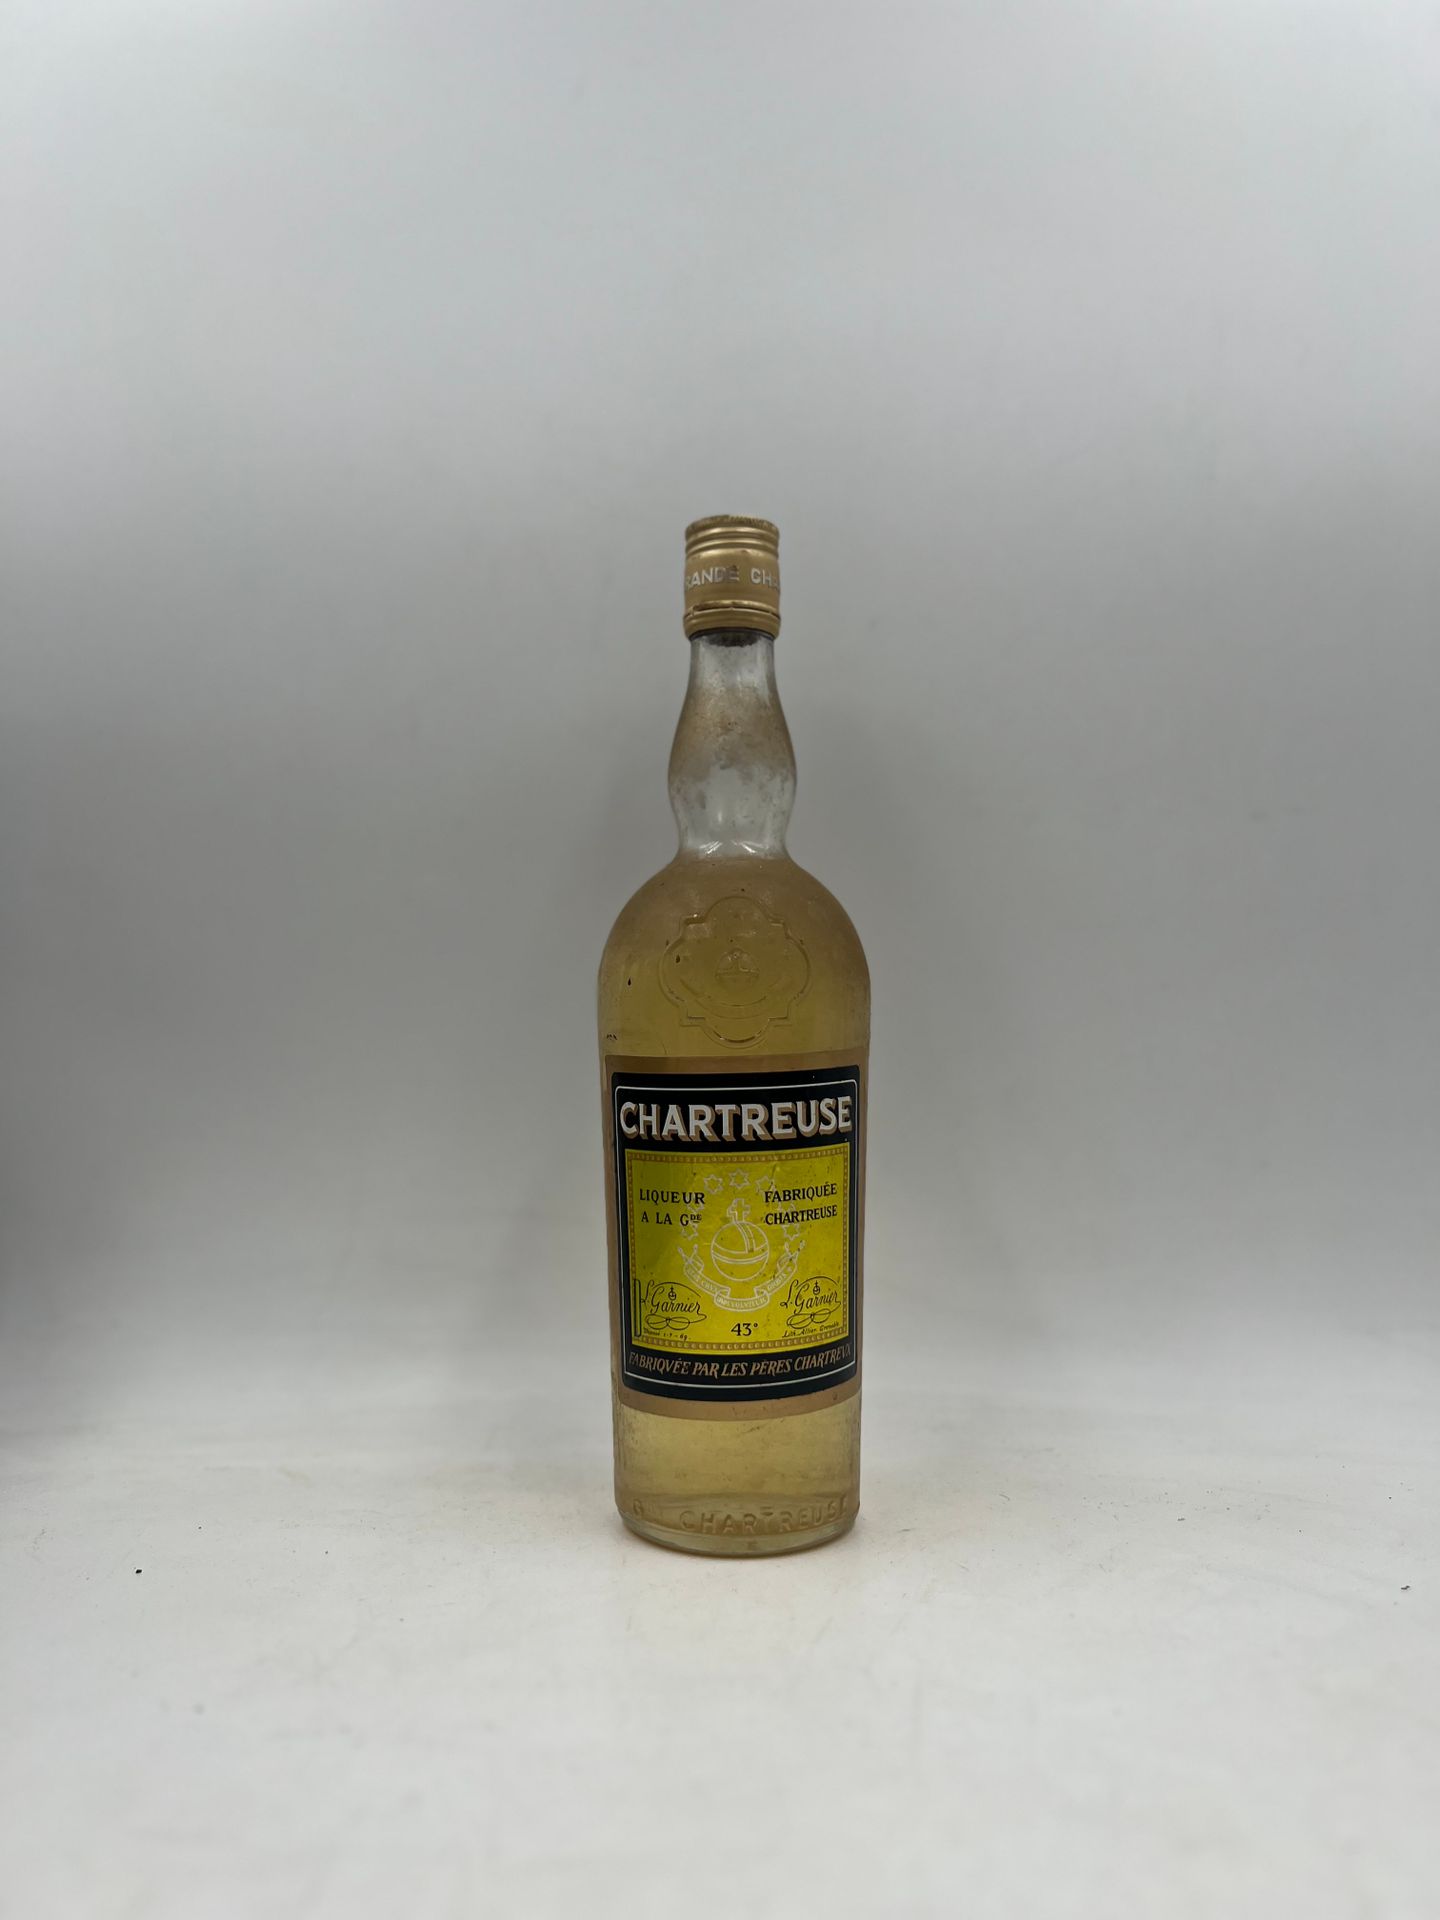 CHARTREUSE Jaune 1 Flasche Chartreuse gelb Periode 64-66